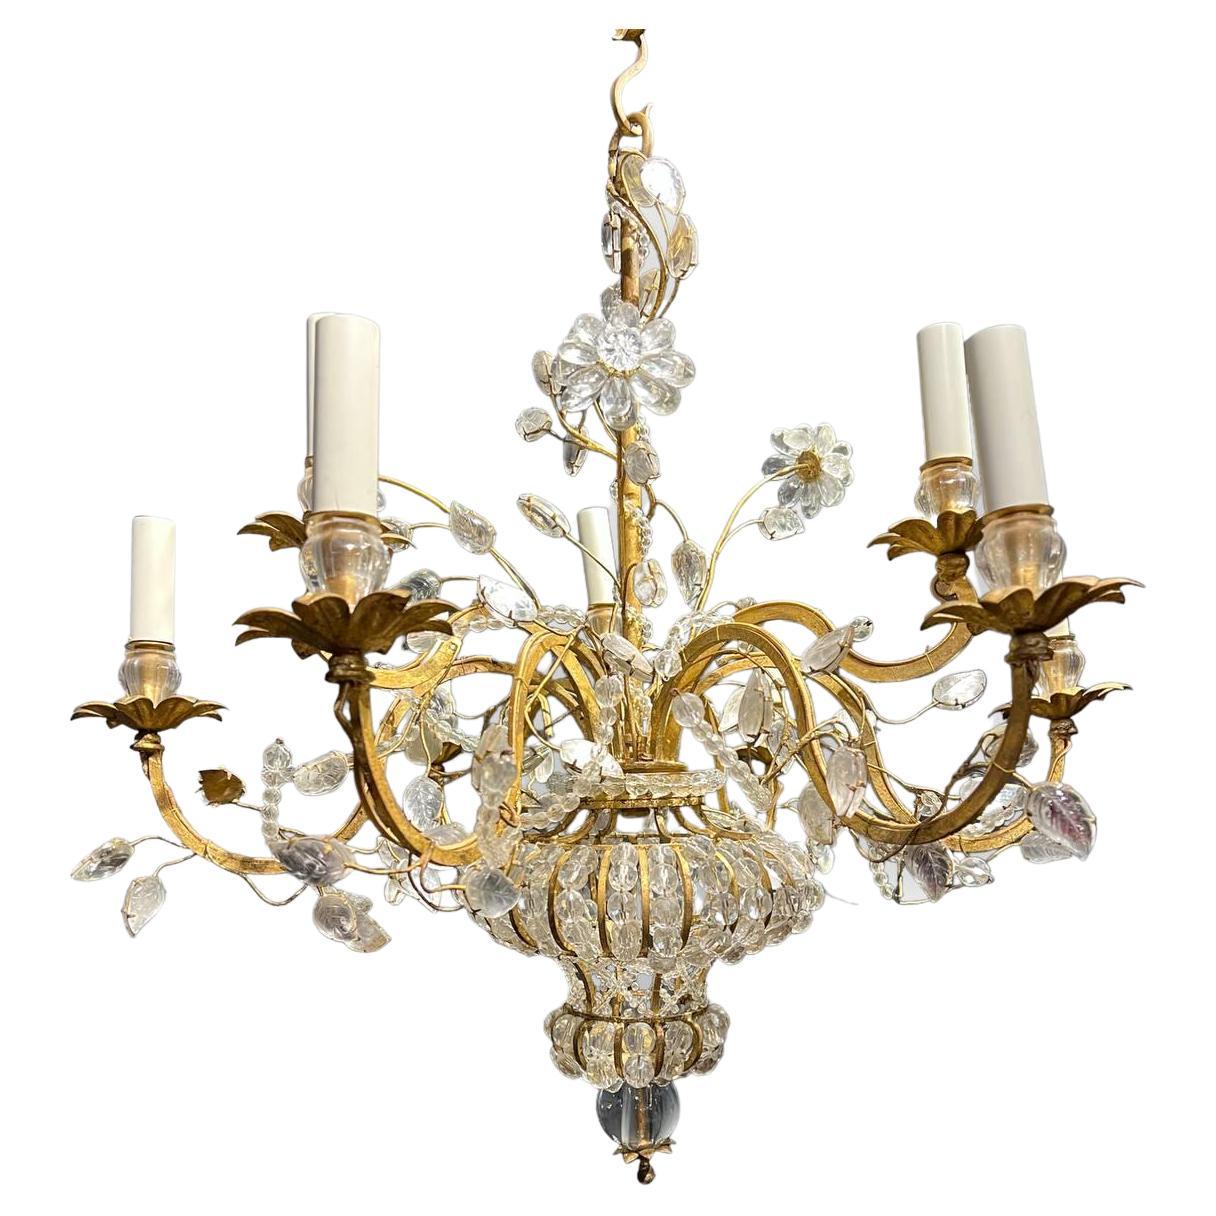 A circa 1930's French Bagues chandelier